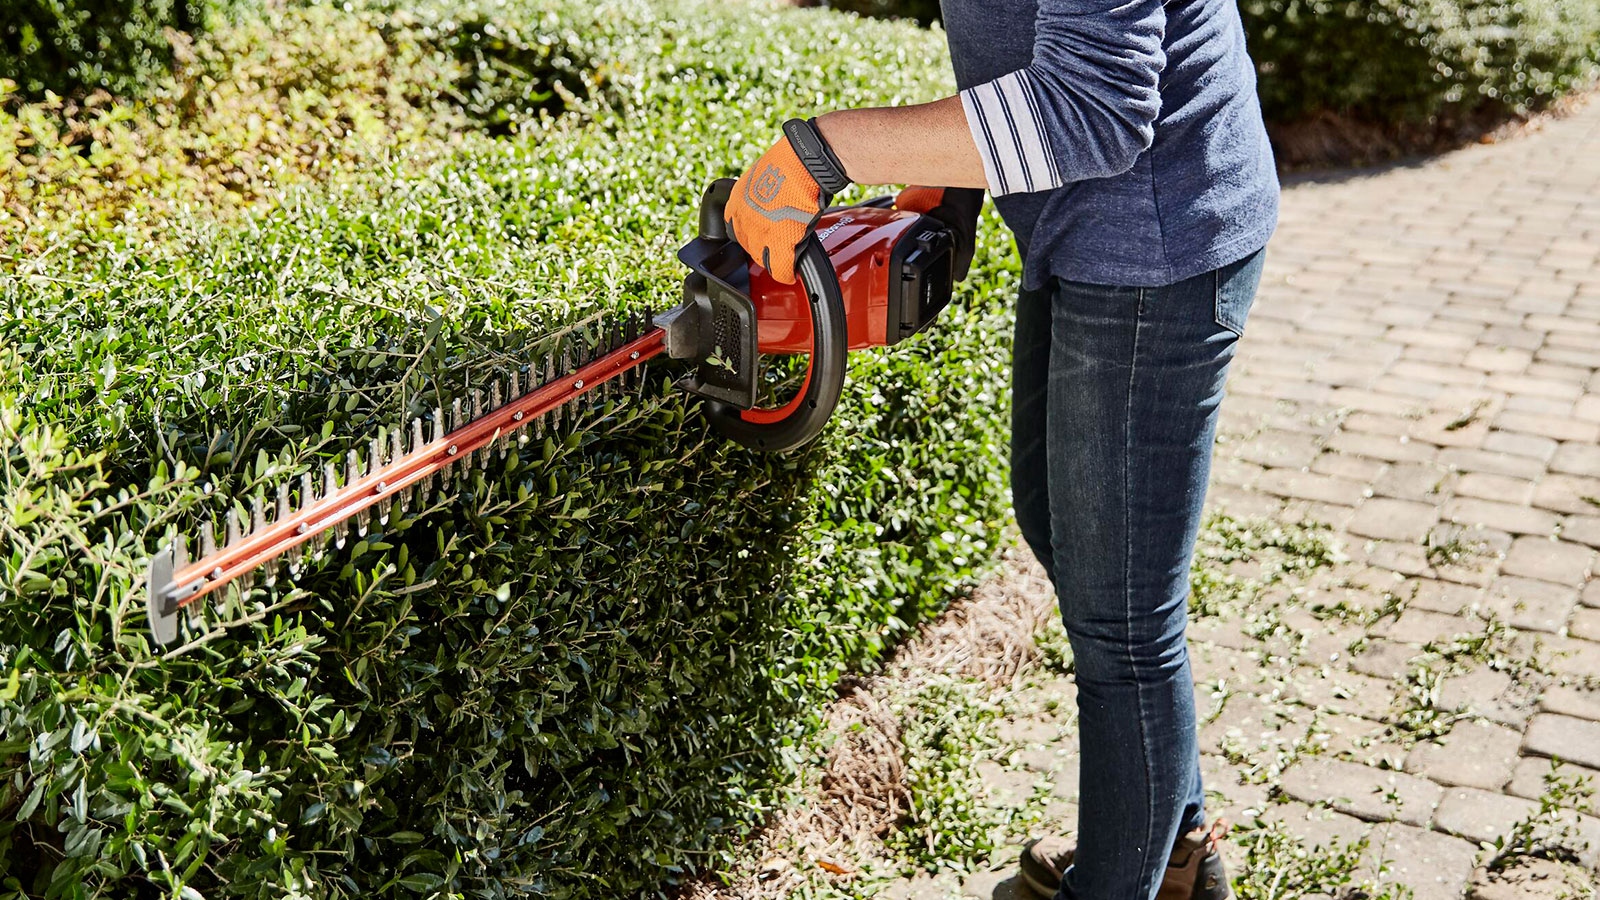 40V Max* Cordless Hedge Trimmer, 24-Inch